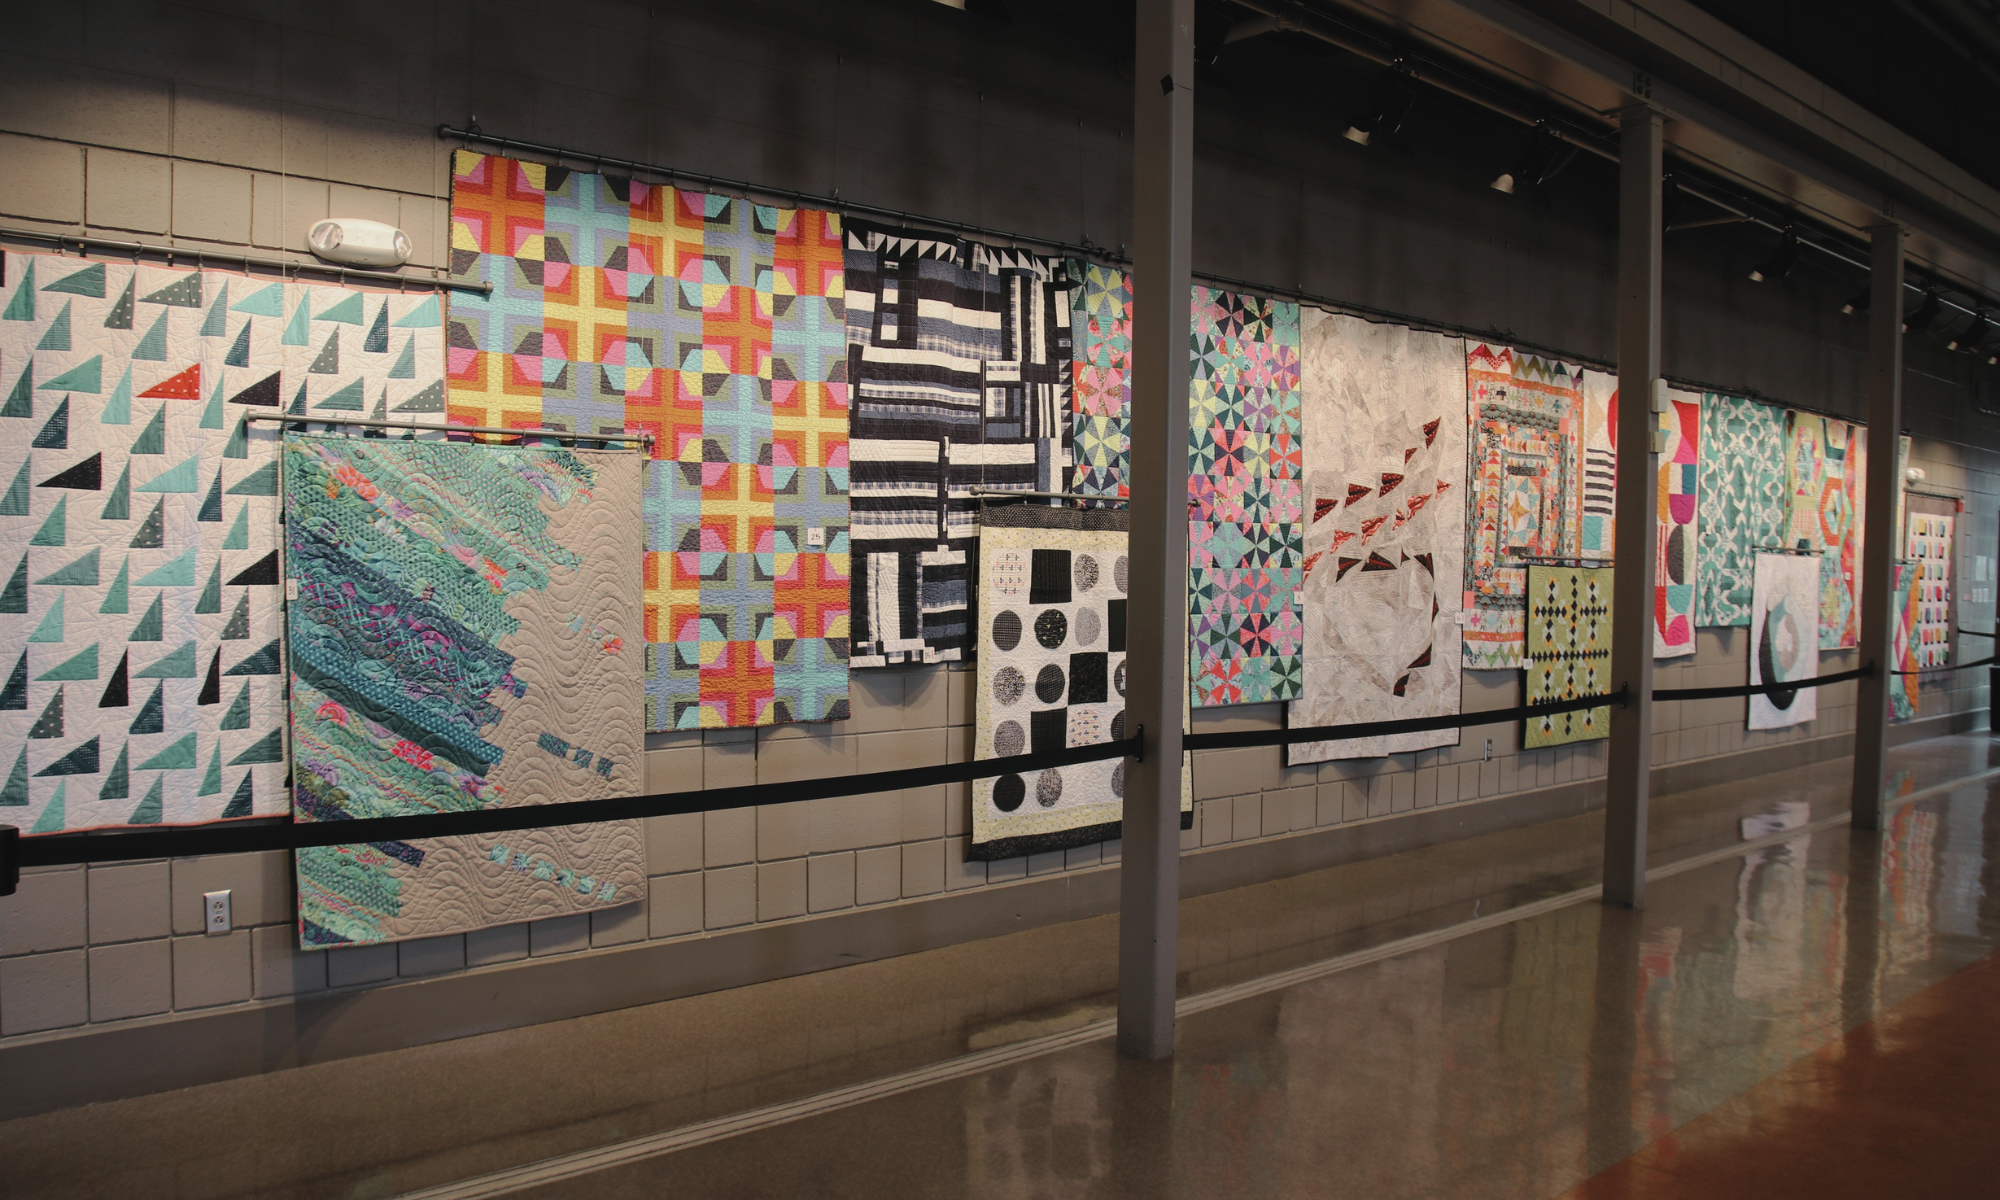 a variety of modern quilts hung for display on a painted concrete block wall in an art gallery